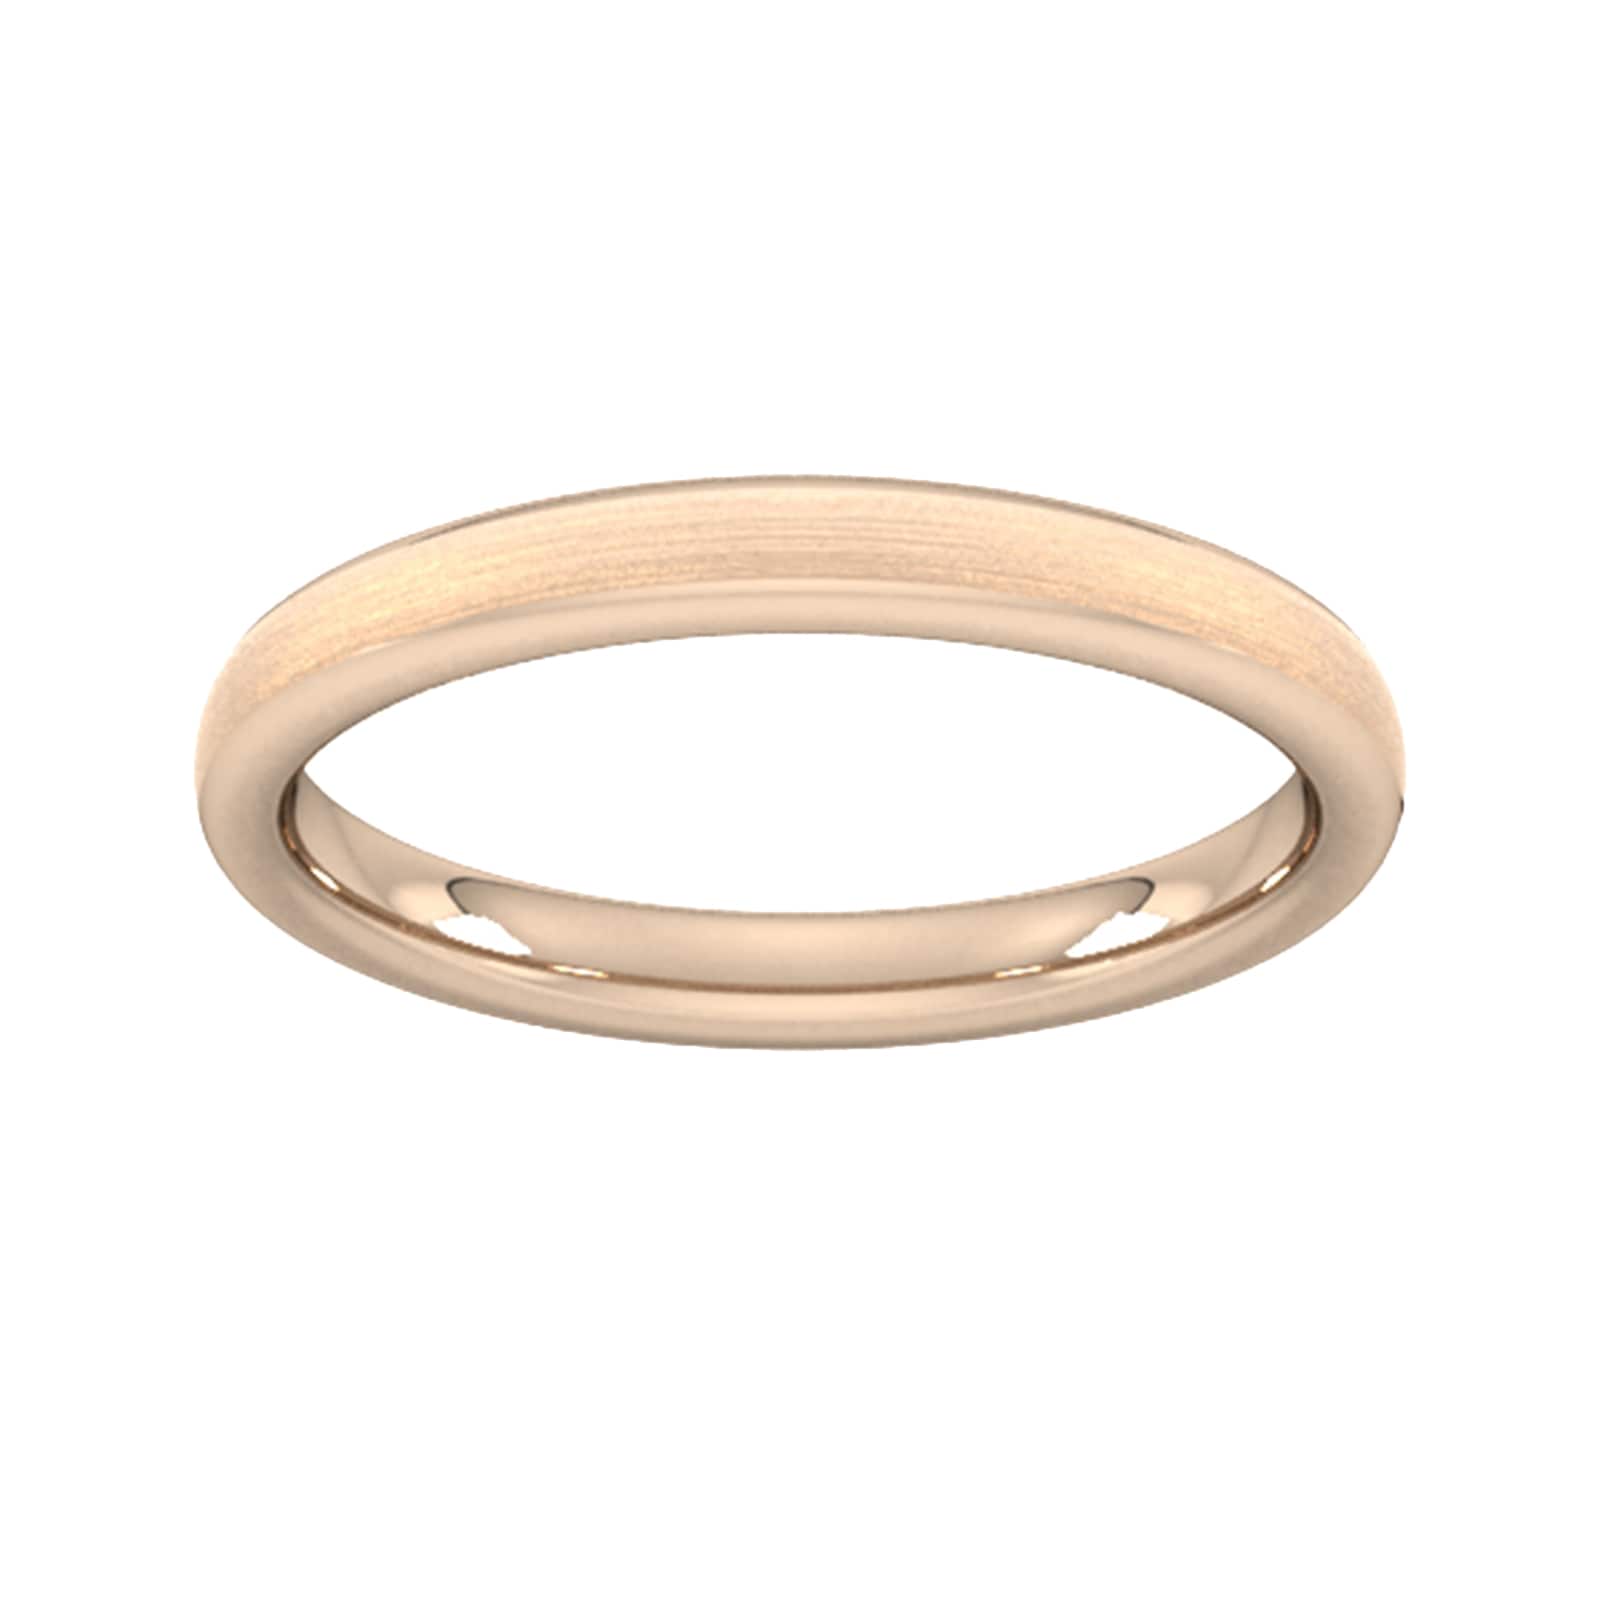 2.5mm Traditional Court Heavy Matt Finished Wedding Ring In 18 Carat Rose Gold - Ring Size P